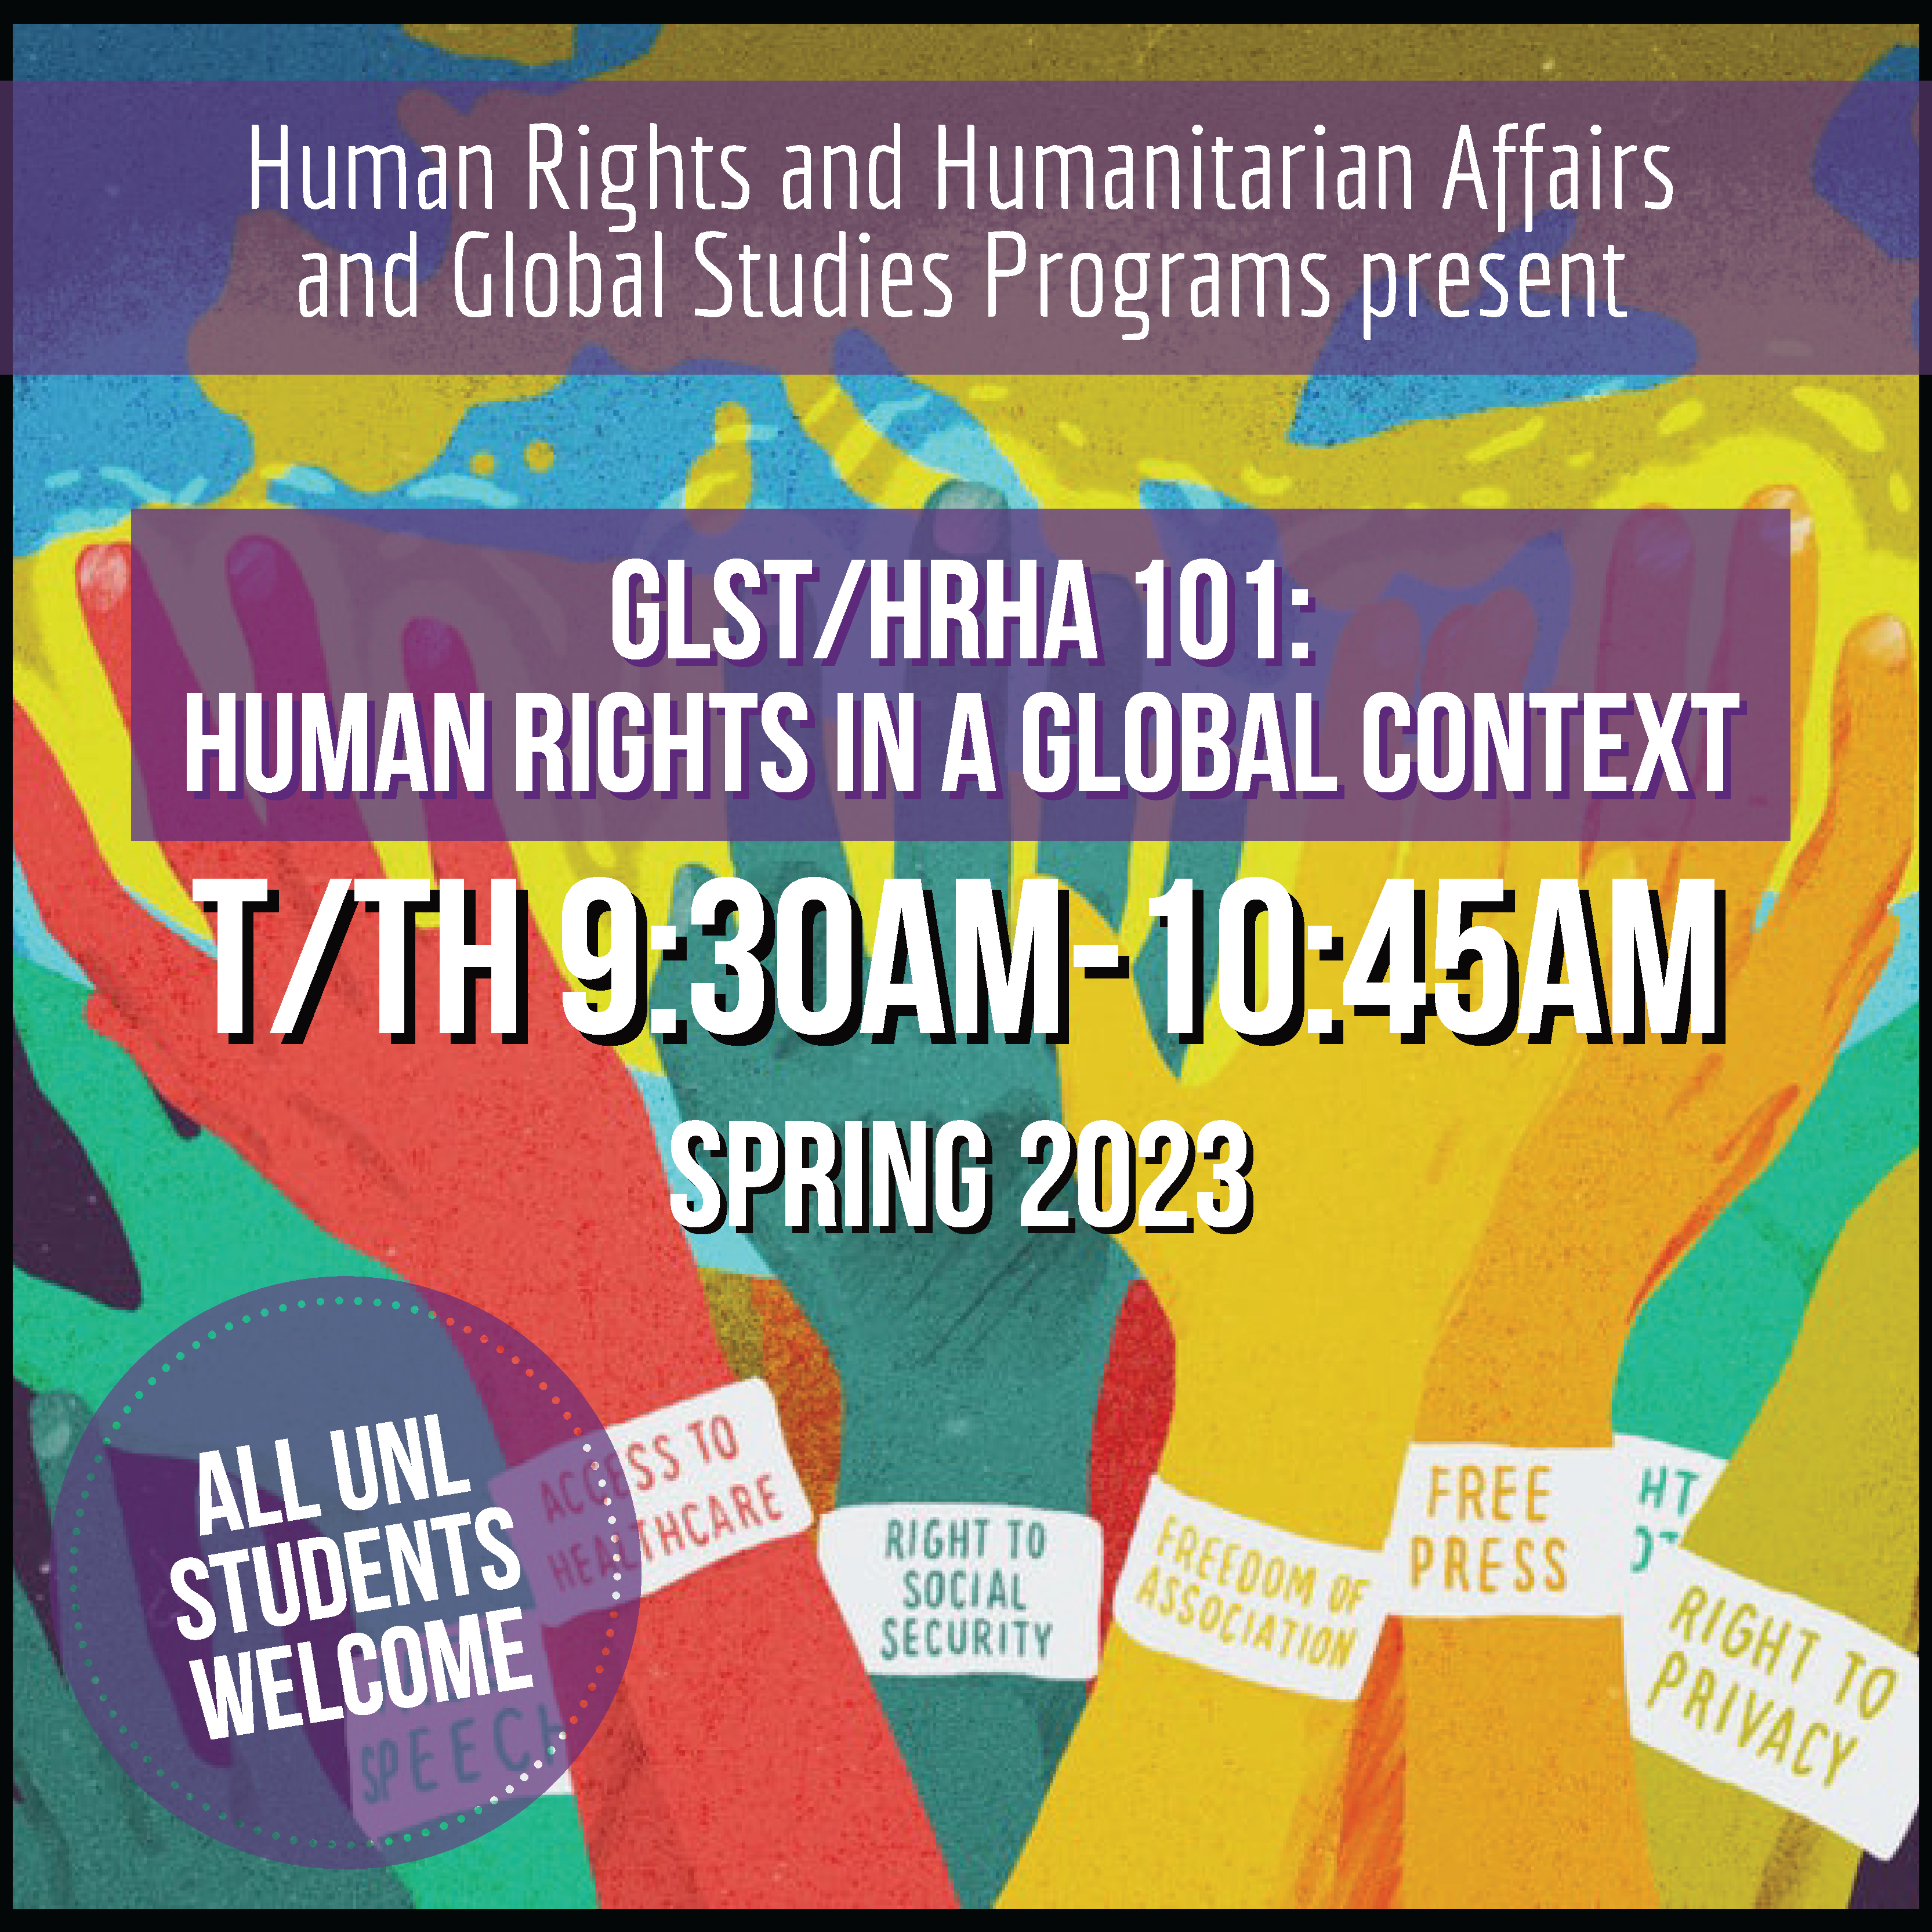 GLST/HRHA 101: Human Rights in a Global Perspective